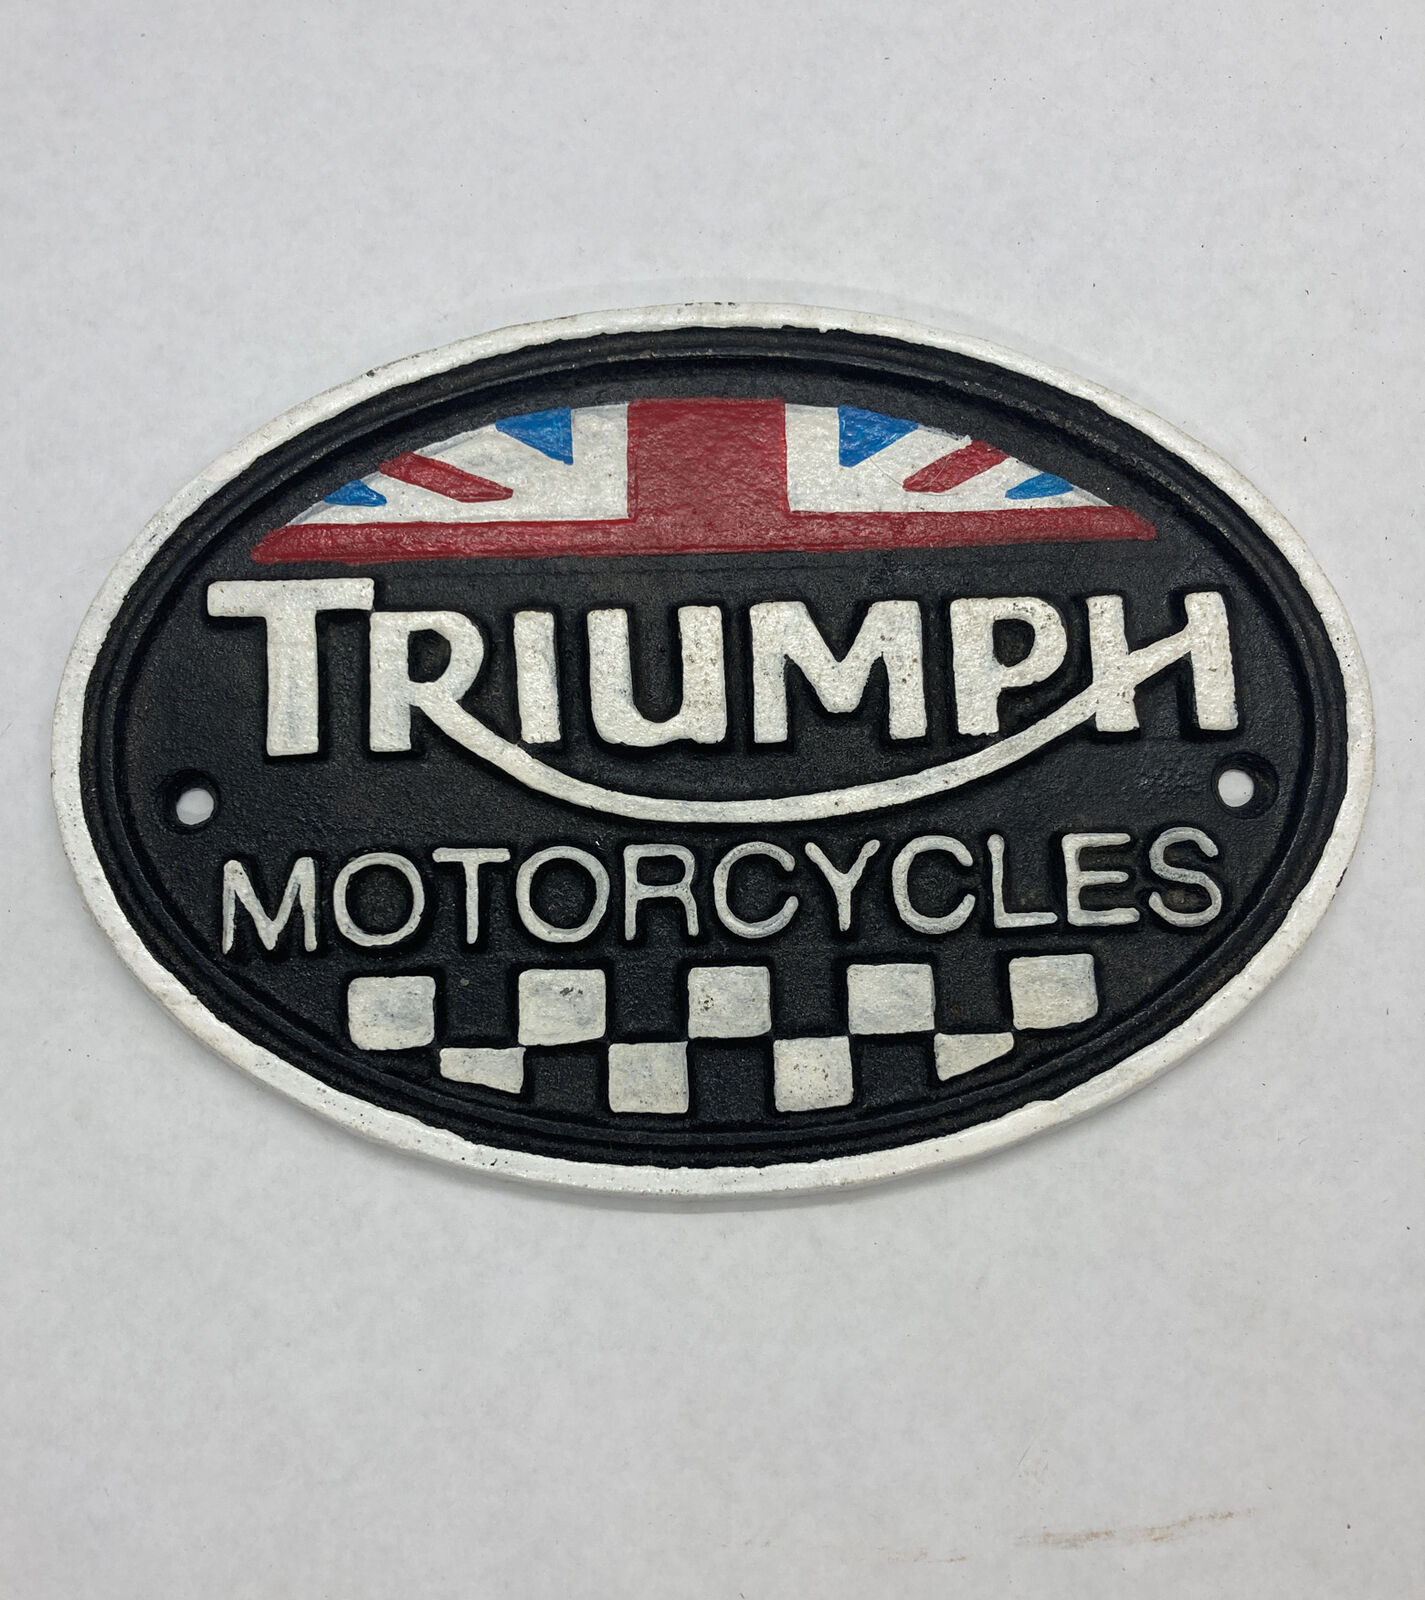 TRIUMPH Motorcycles Oval Cast Iron Sign, 5.5”x7.75” Reproduction